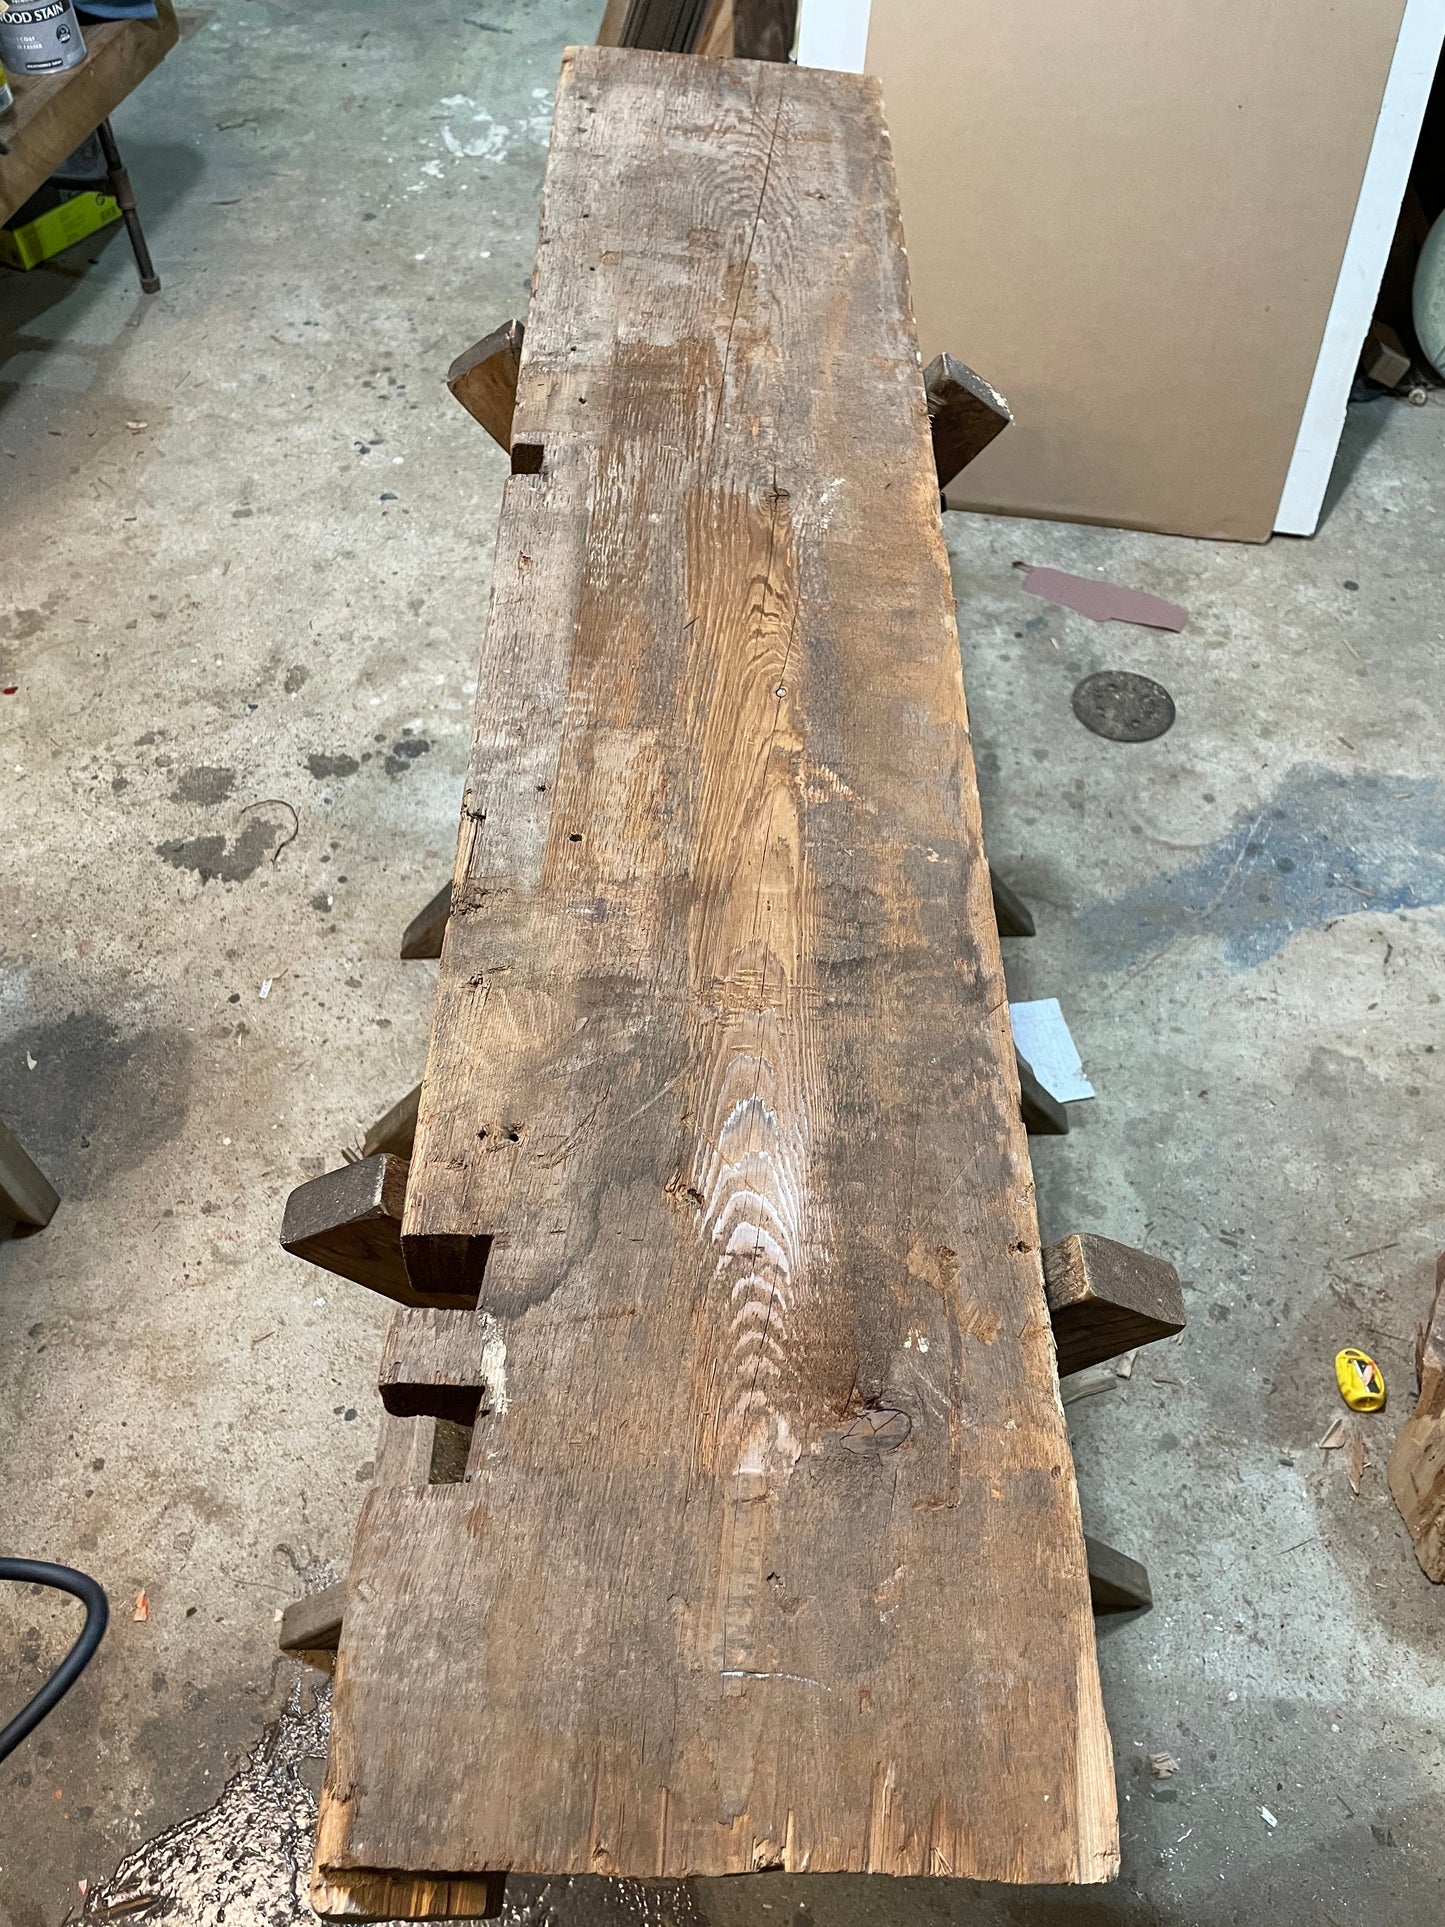 HEAVY-DUTY Rustic Reclaimed Wood For Sale!! UNFINISHED AGED WOOD